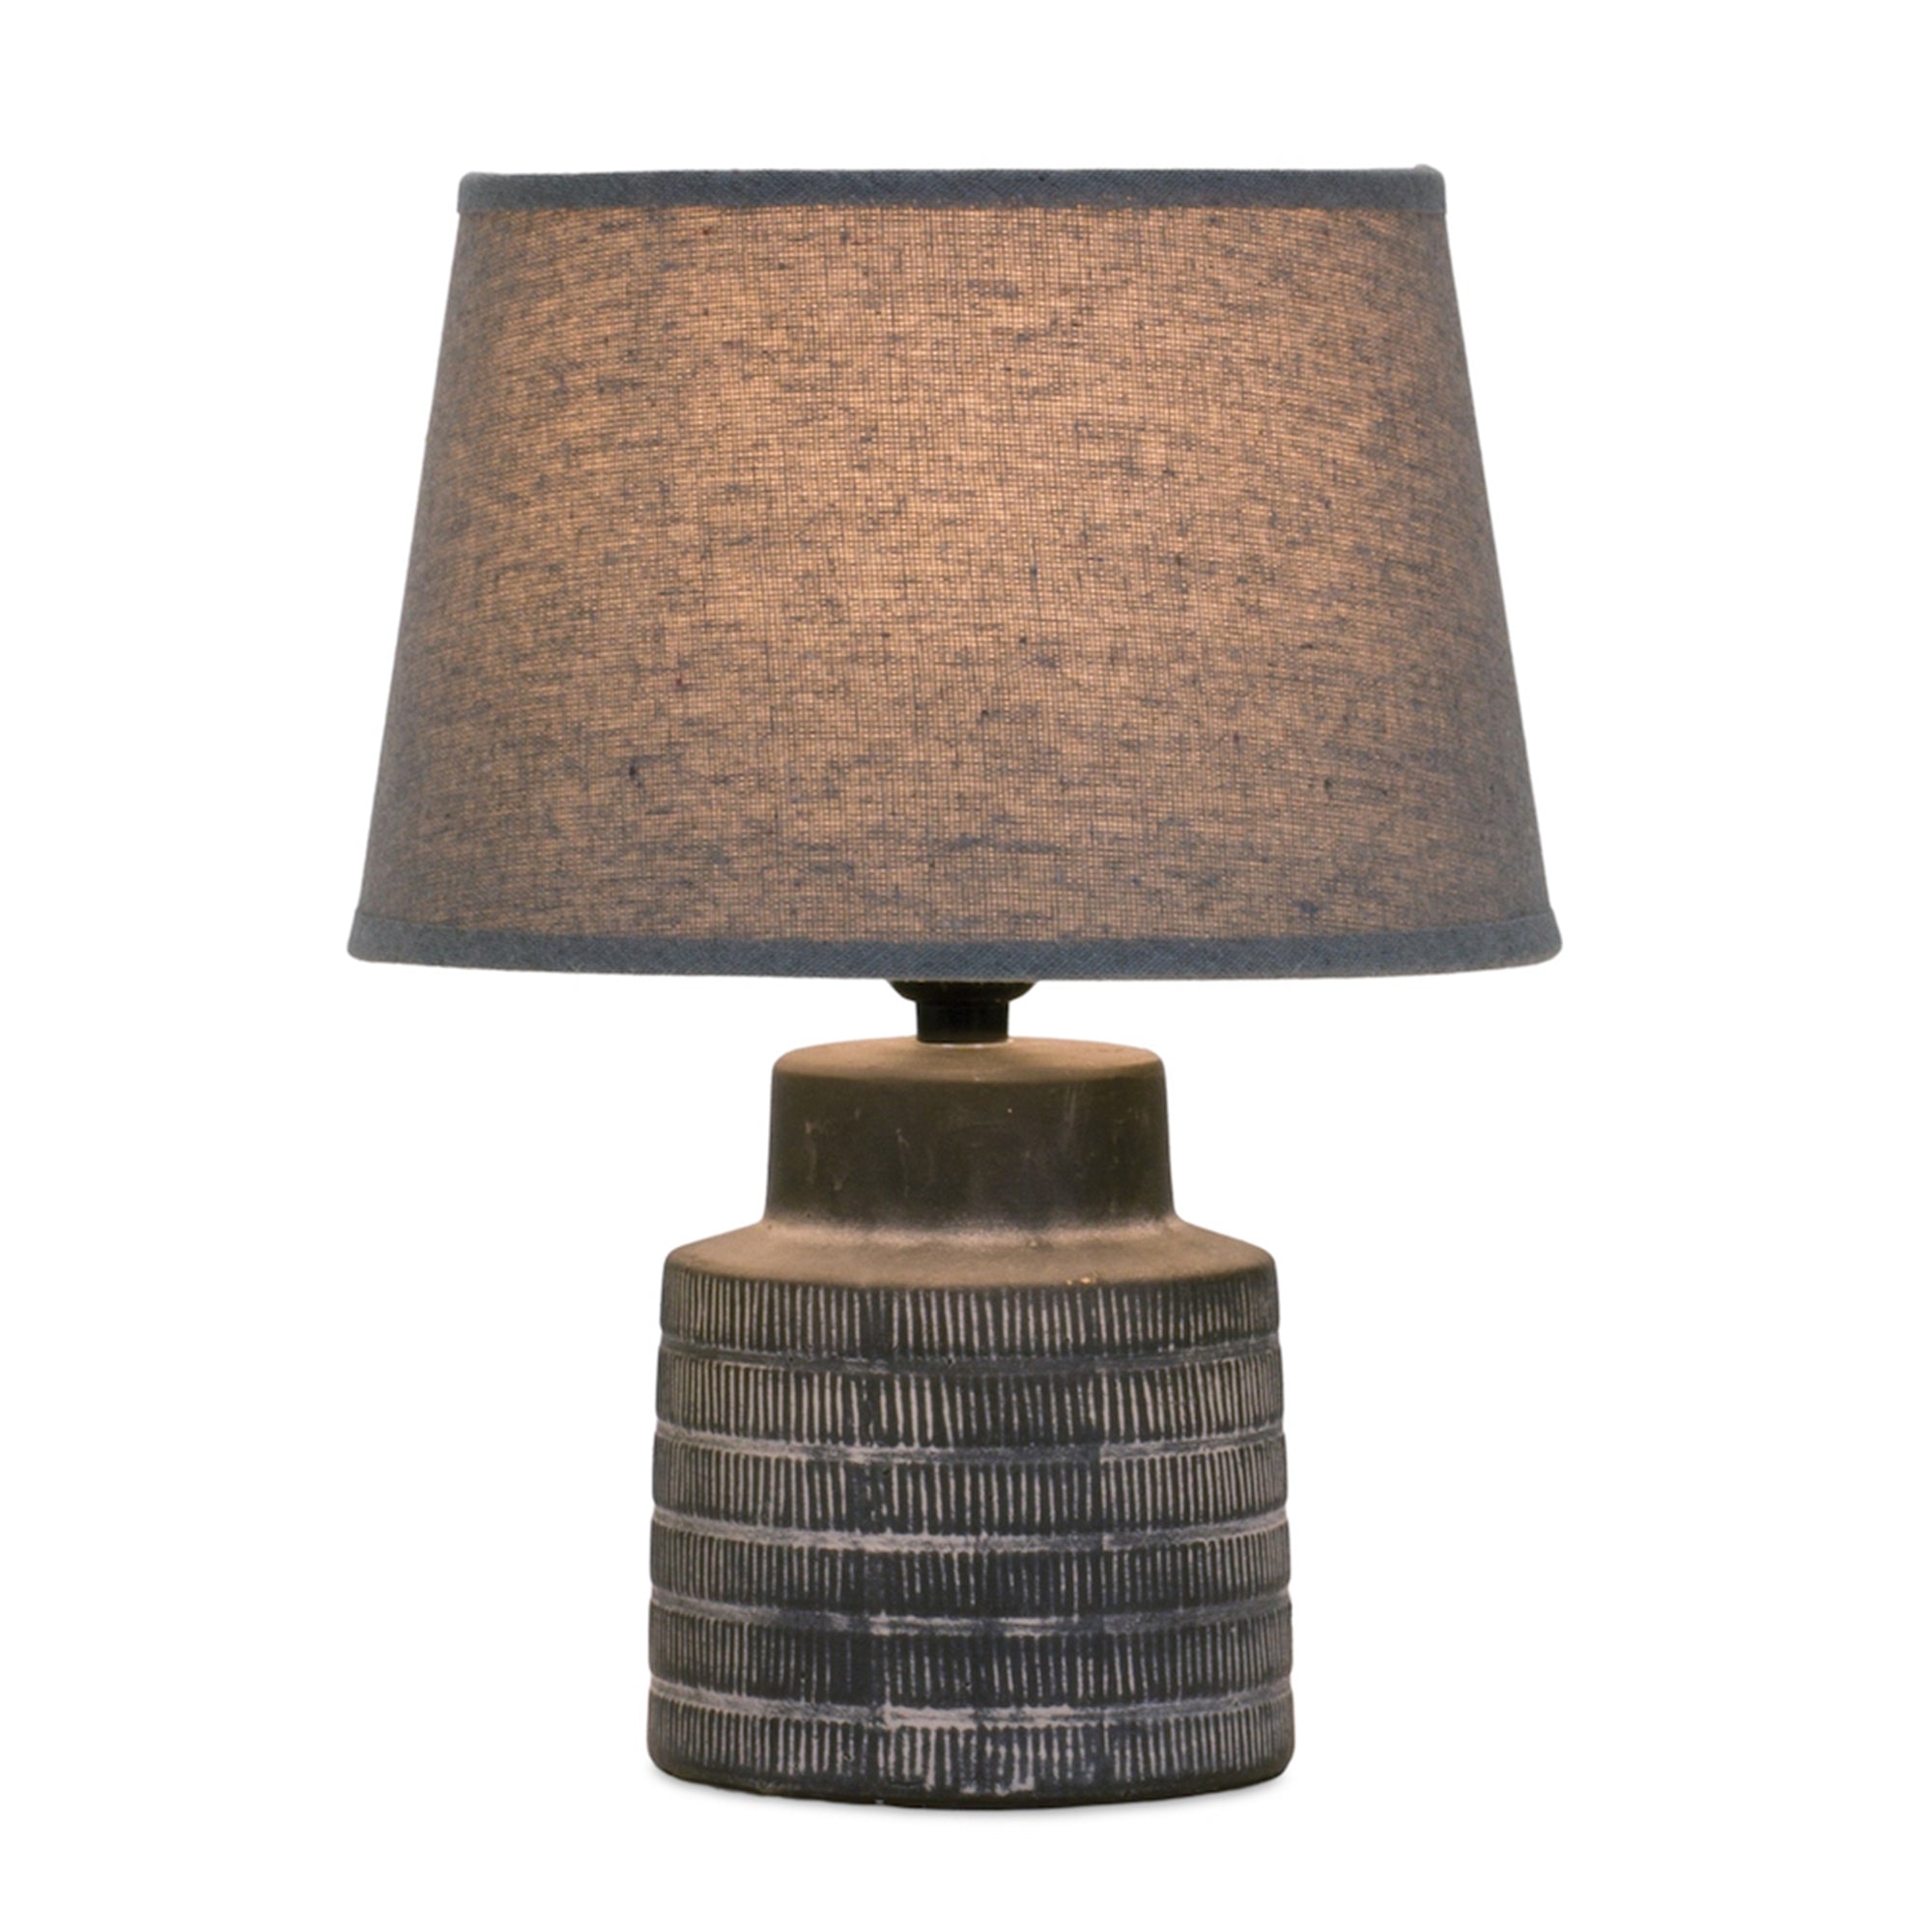 Etched Terra Cotta Table Lamp 13"H